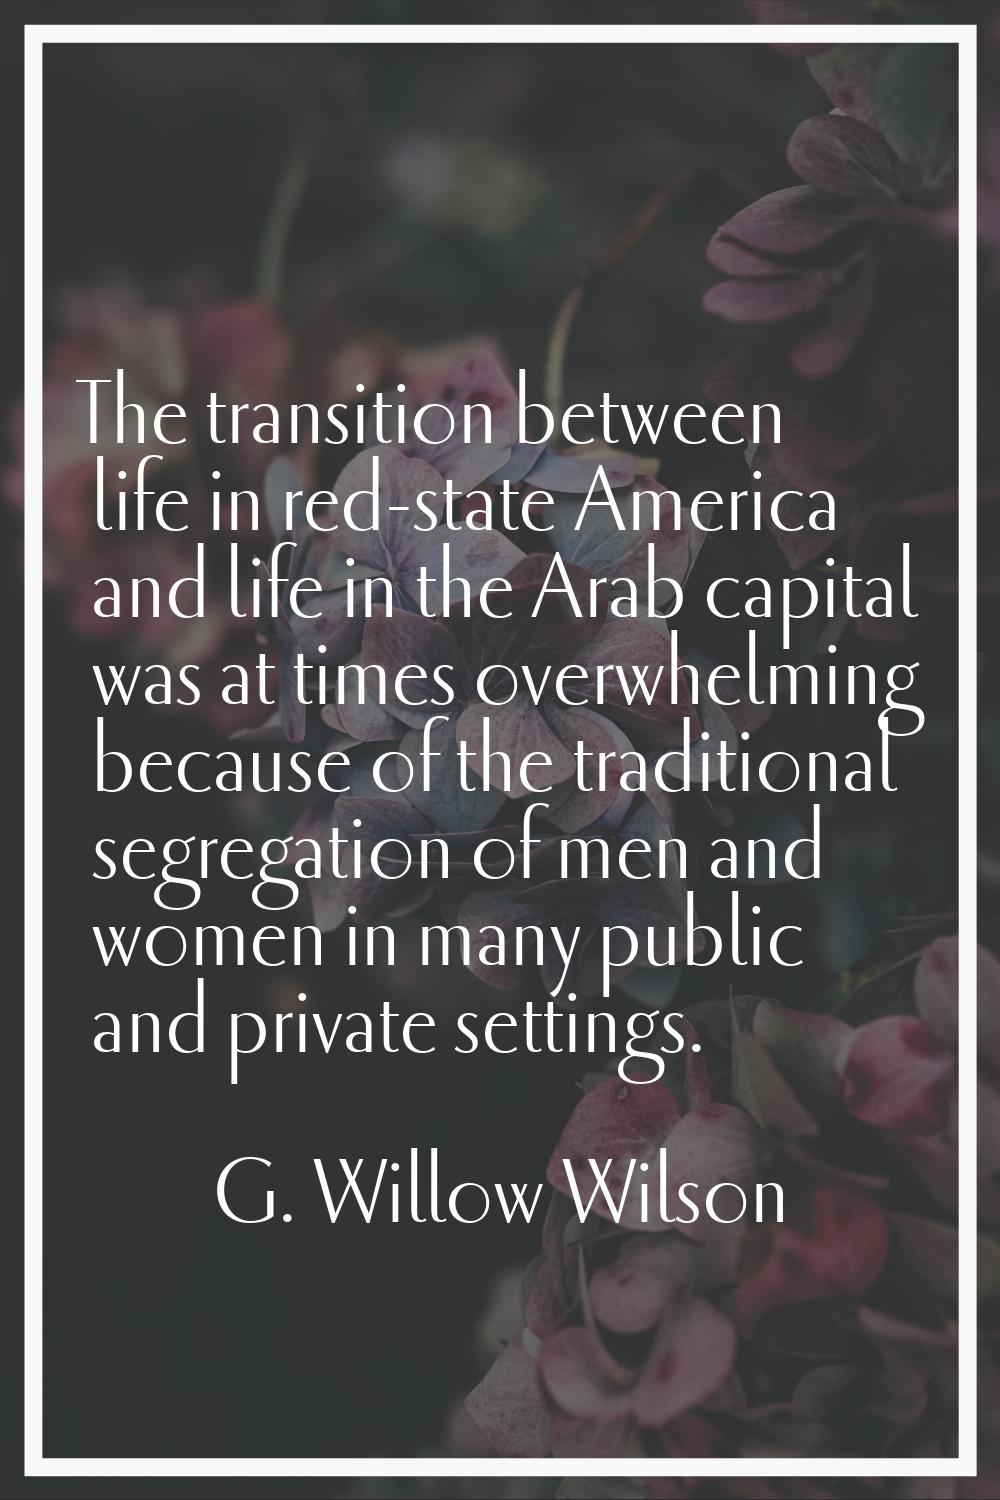 The transition between life in red-state America and life in the Arab capital was at times overwhel